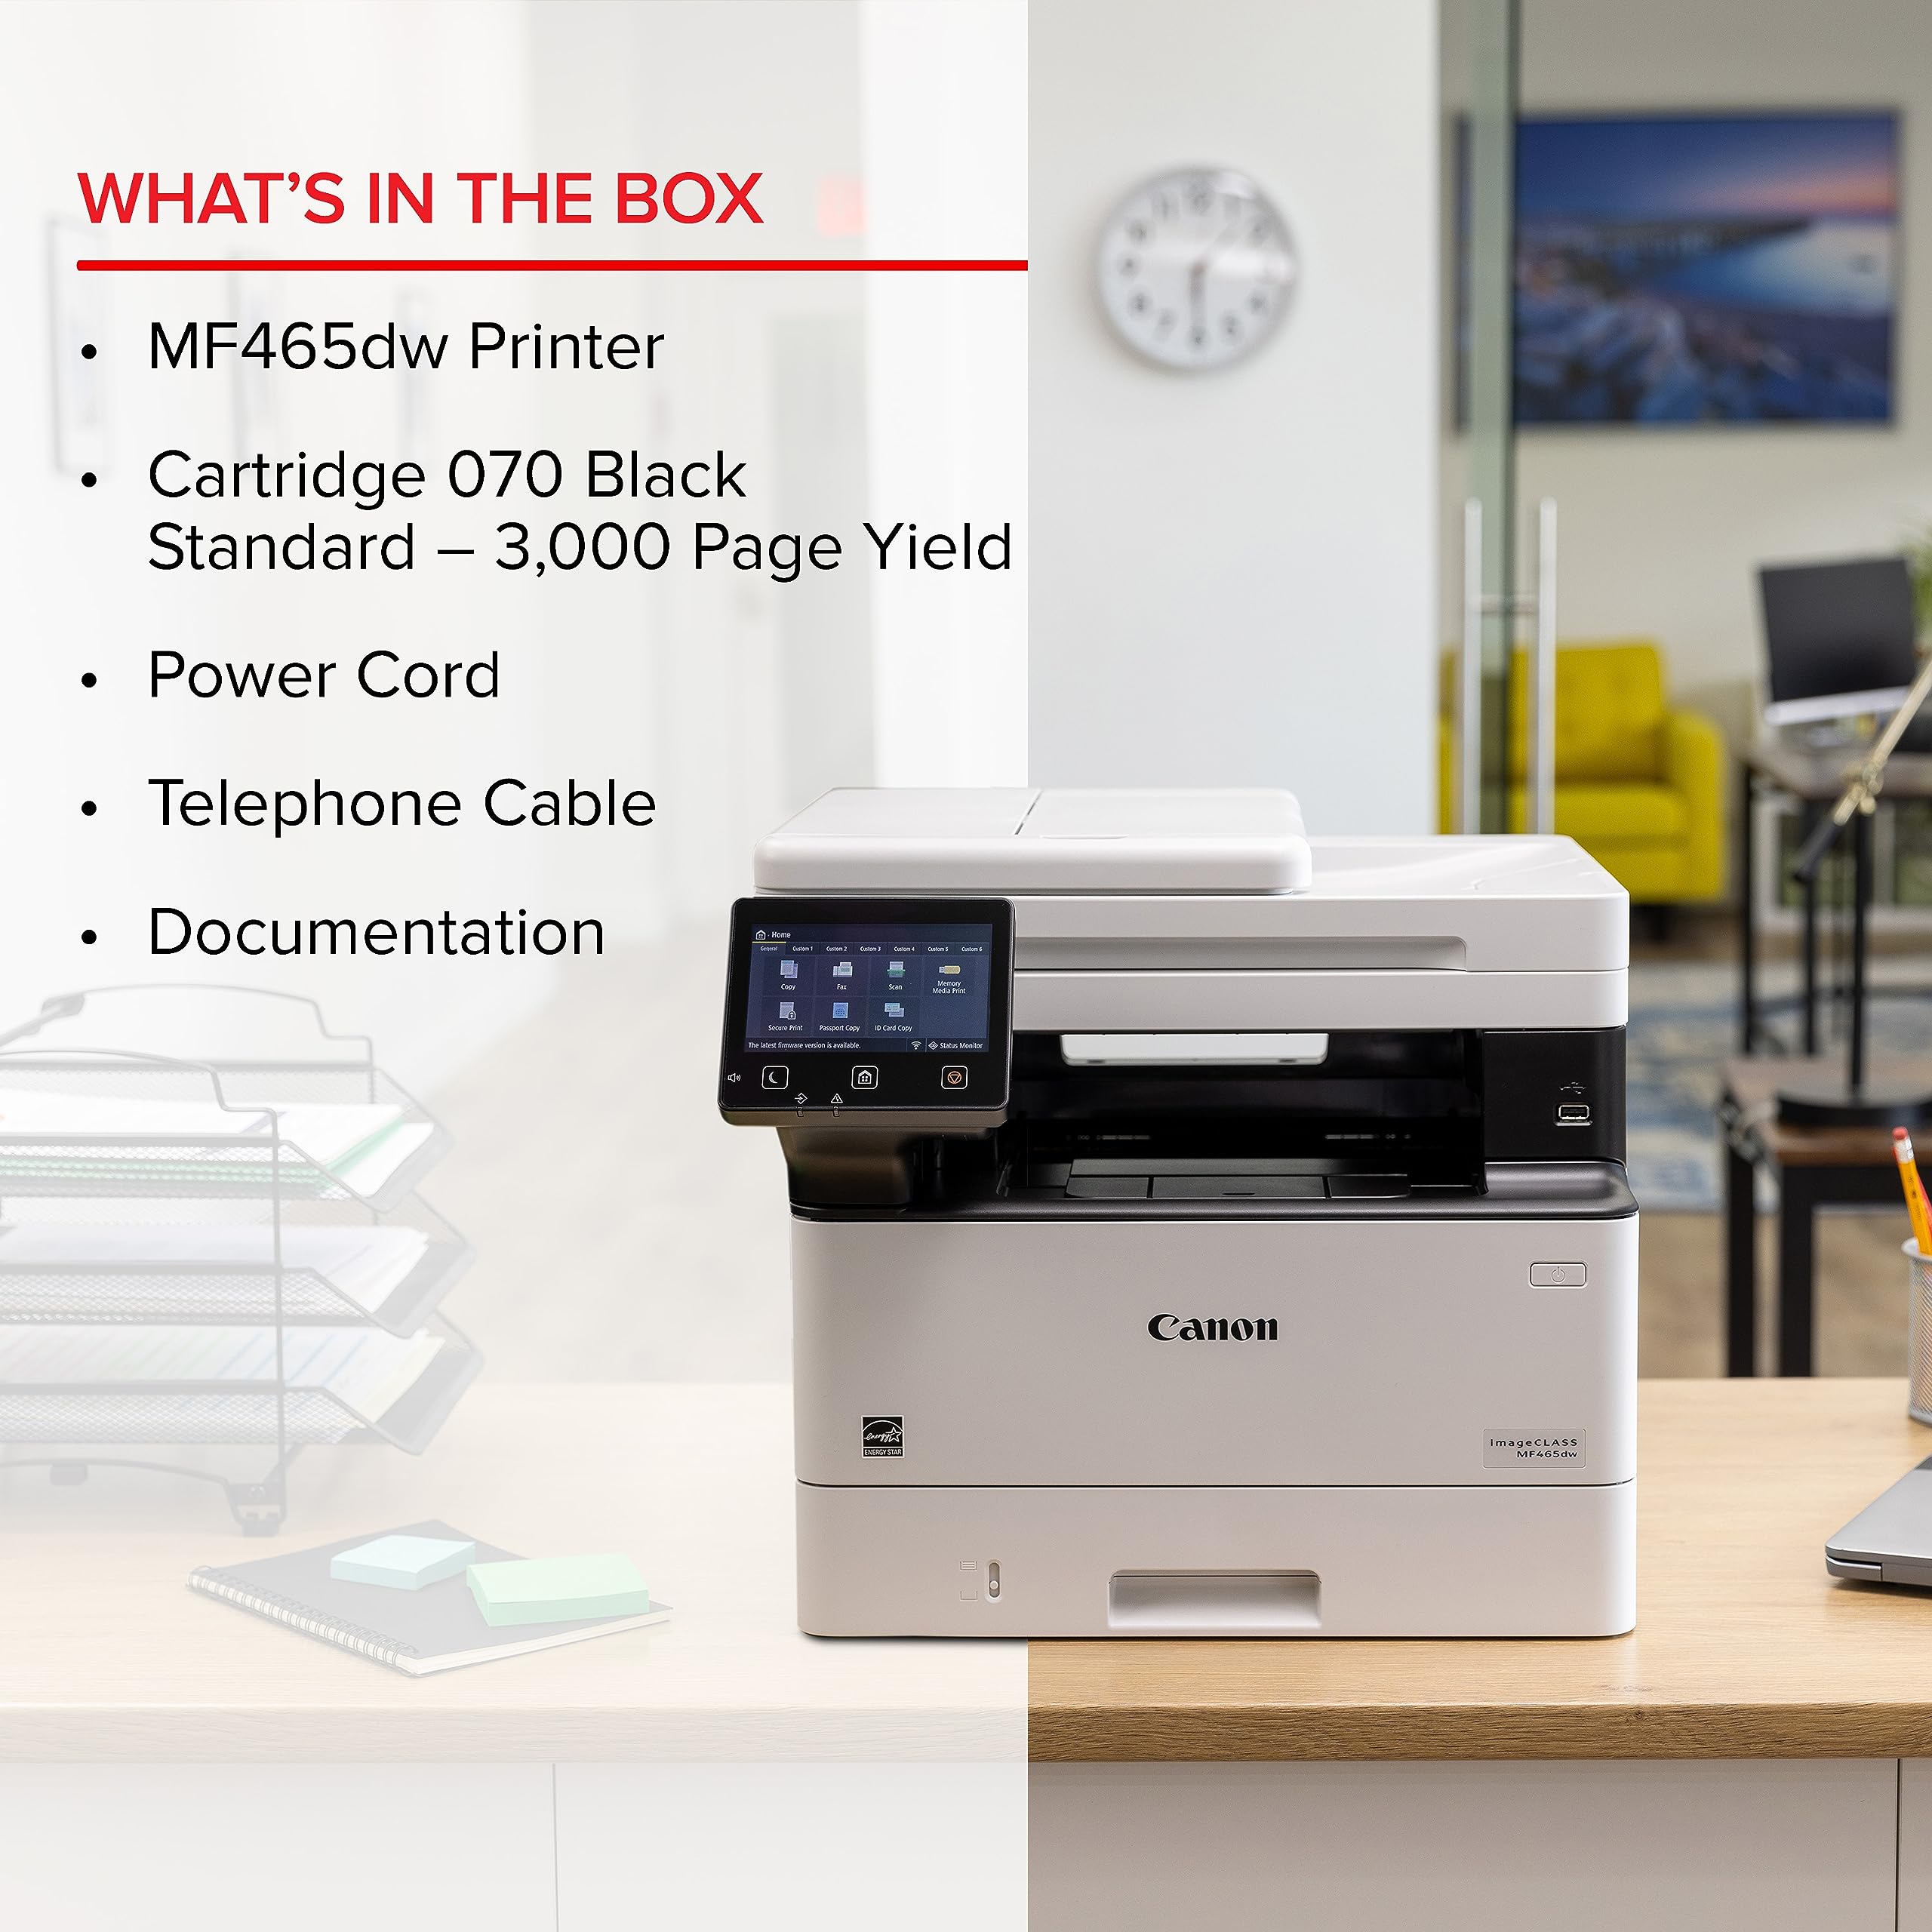 Canon imageCLASS MF465dw - All in One, Wireless, Mobile Ready, Duplex Laser Printer with Expandable Paper Capacity and 3 Year Limited Warranty,White